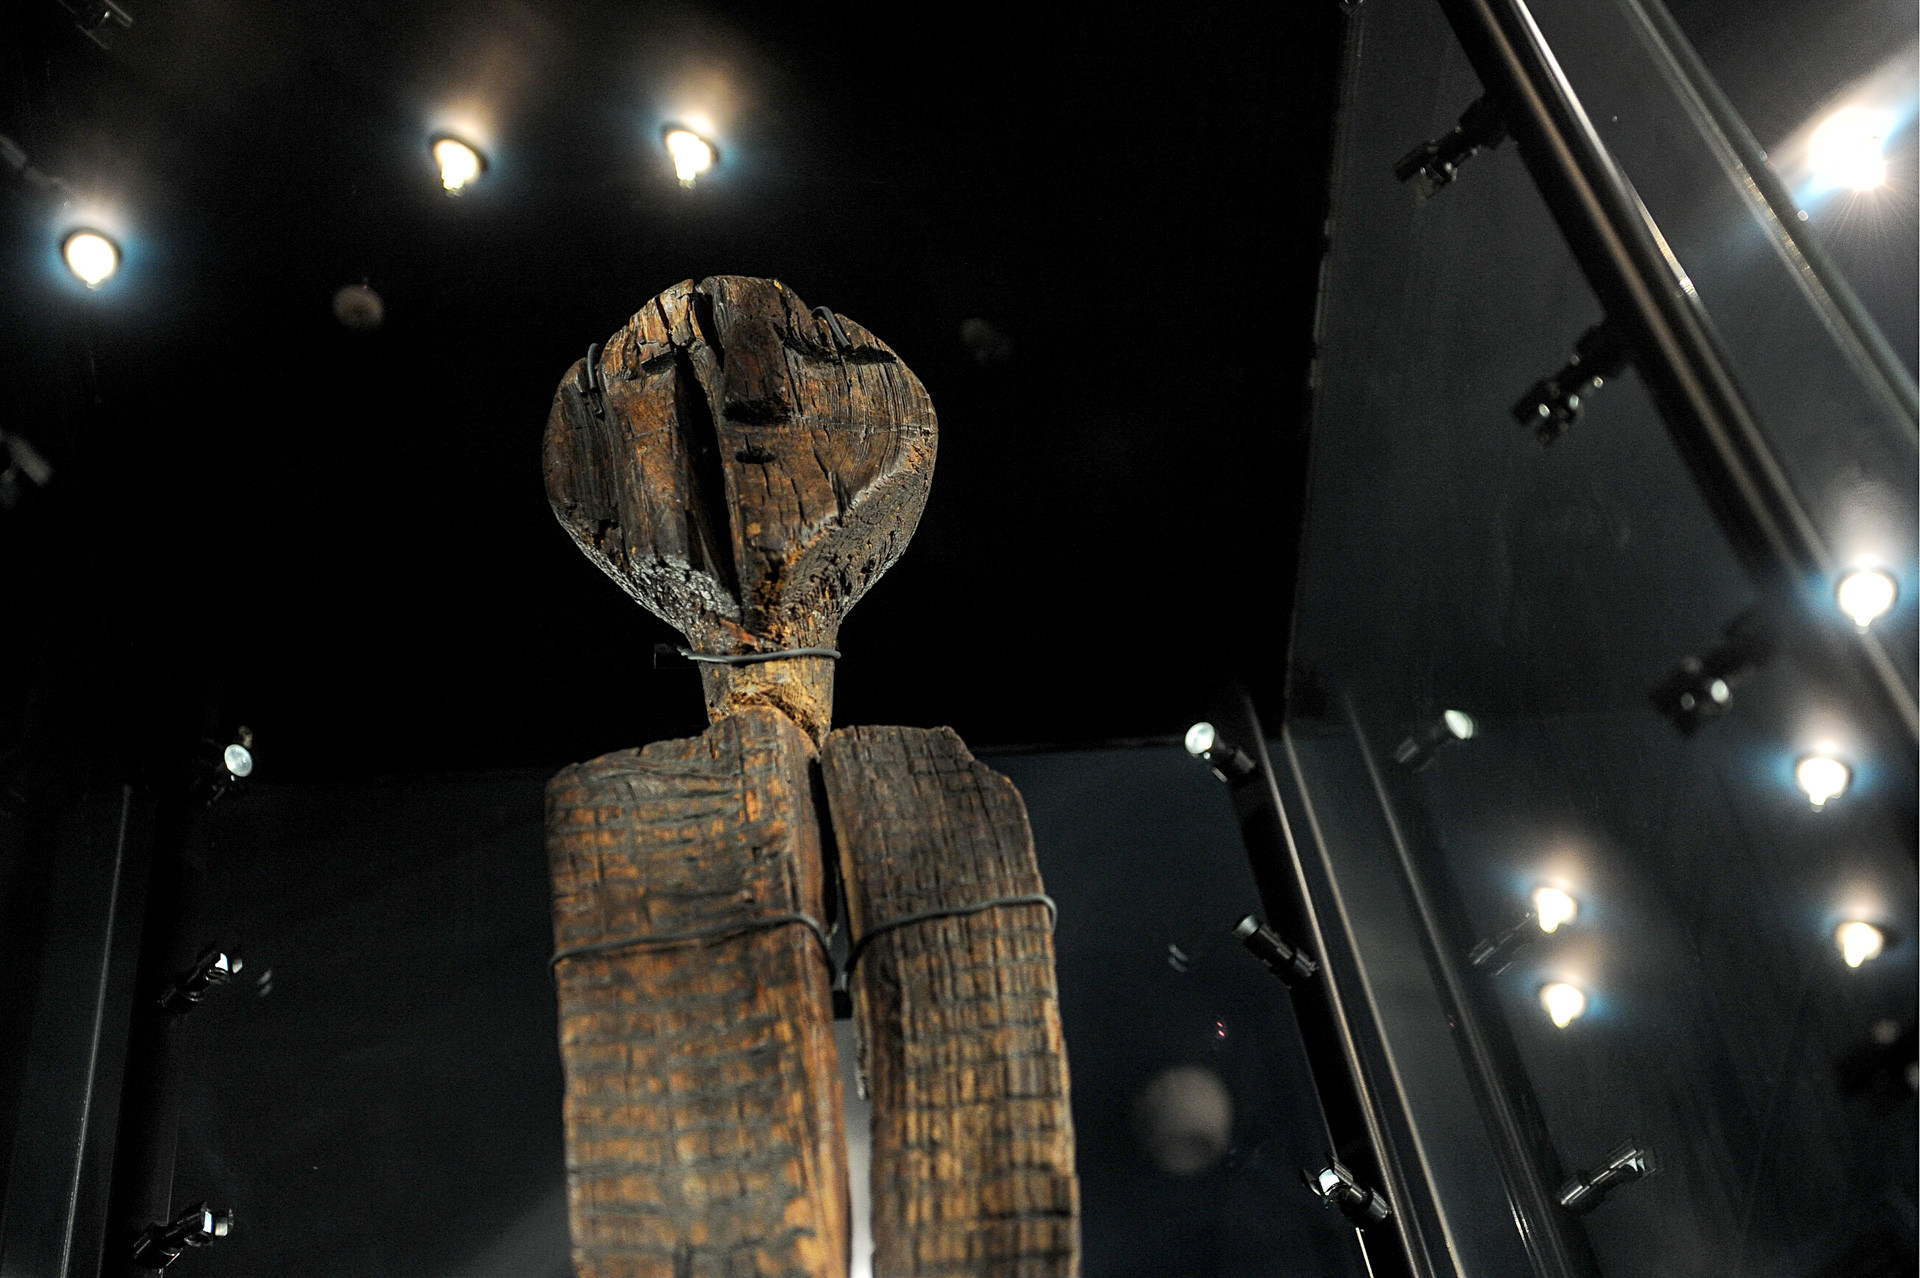 The Shigir Idol, the most ancient wooden sculpture, displayed at the Sverdlovsk Regional Lore Museum.